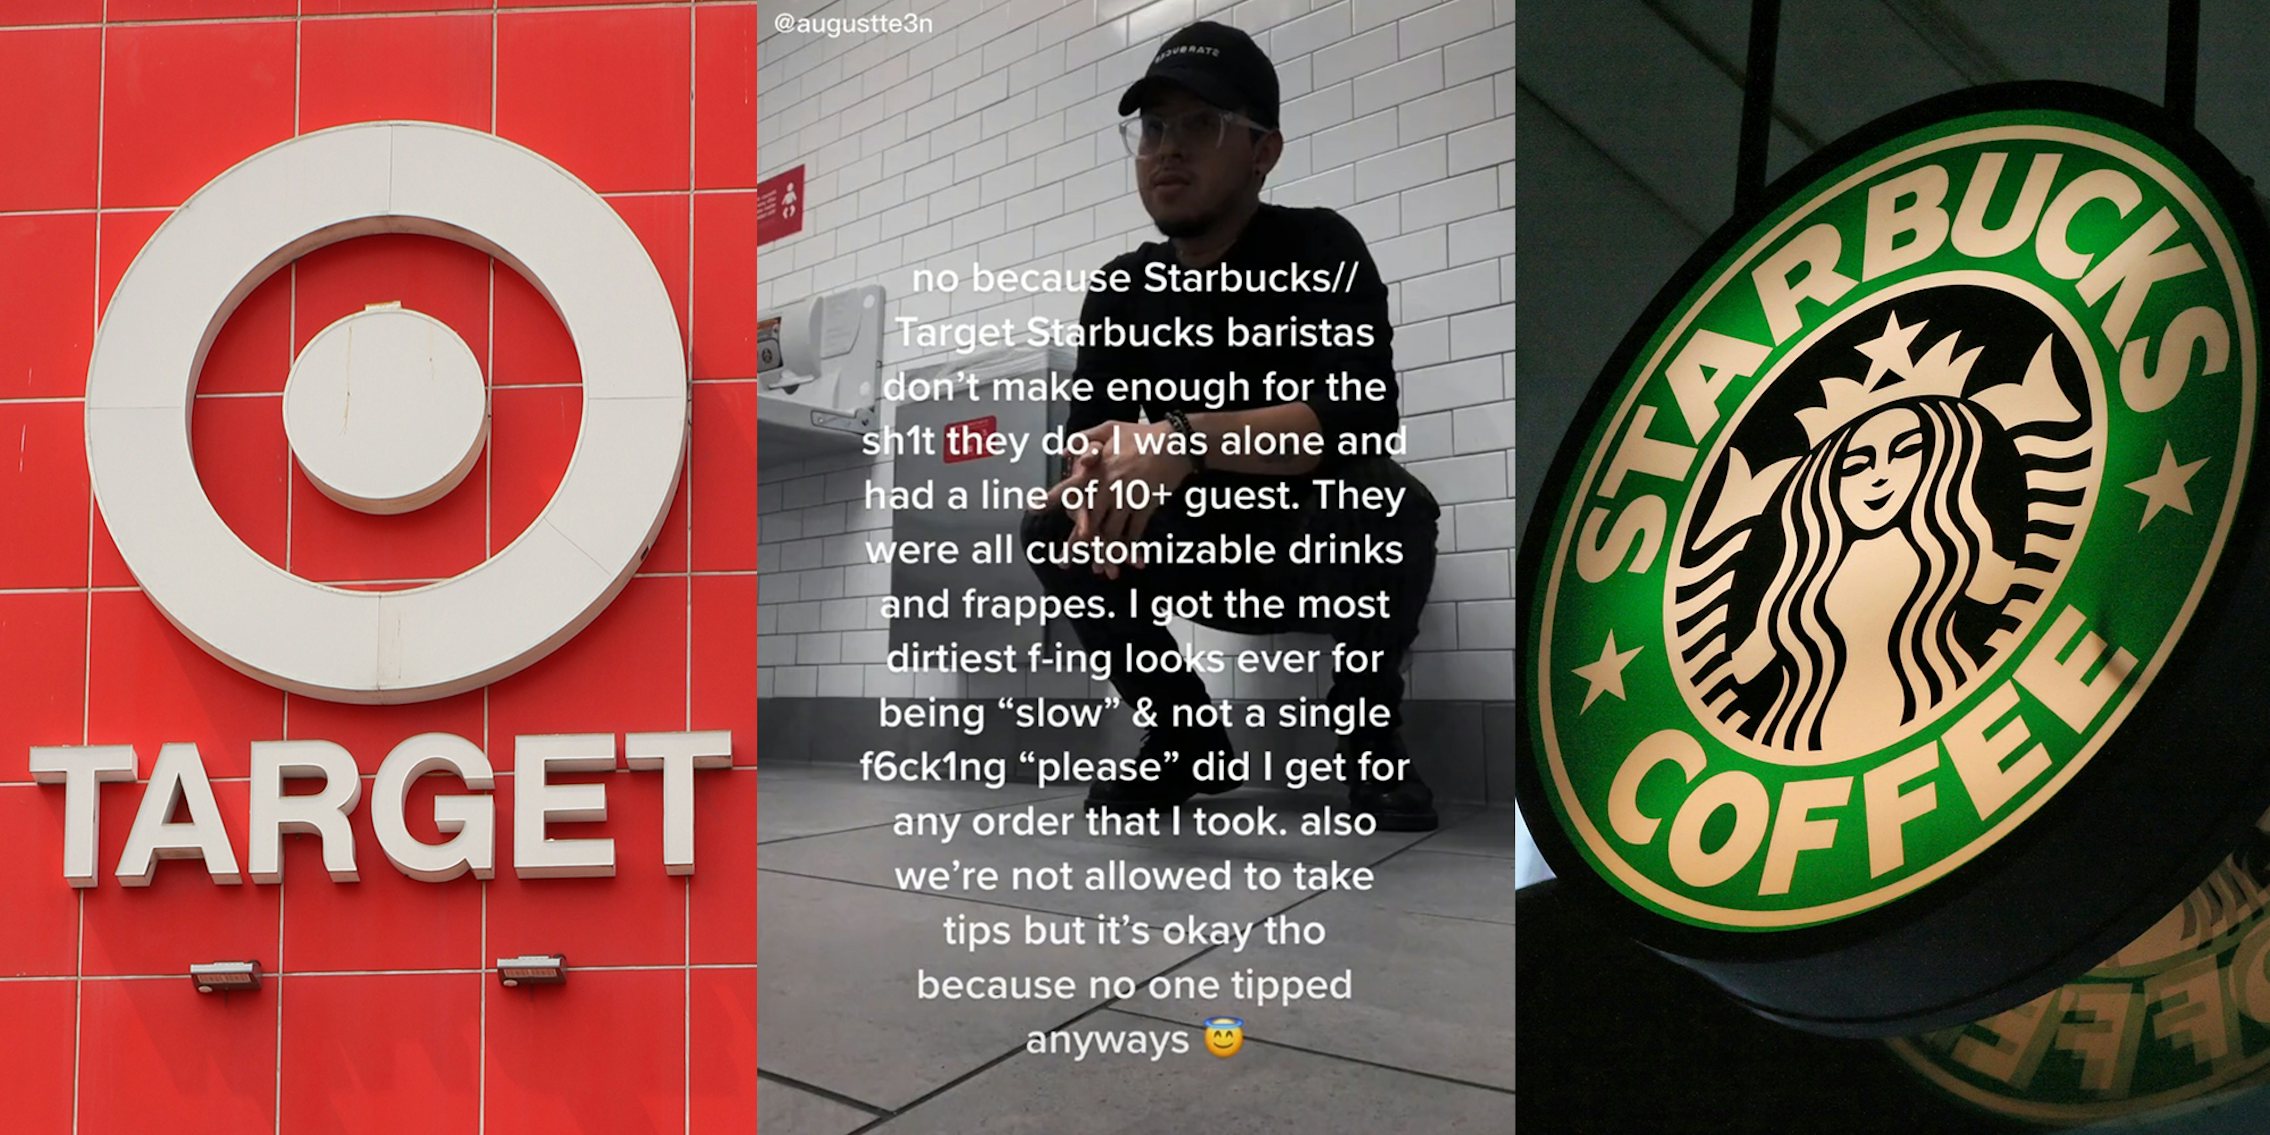 Target logo (l) man in bathroom with caption 'no because Starbucks // Target Starbucks baristas don't make enough for the sh1t they do. I was alone and had a line of 10+ guest. They were all customizable drinks and frappes. I got the most dirtiest f-ing looks ever for being 'slow' & not a single f6ck1ng 'please' did I get for any order that I took. also we're not allowed to take tips but it's okay tho because no one tipped anyways' (c) starbucks coffee sign (r)